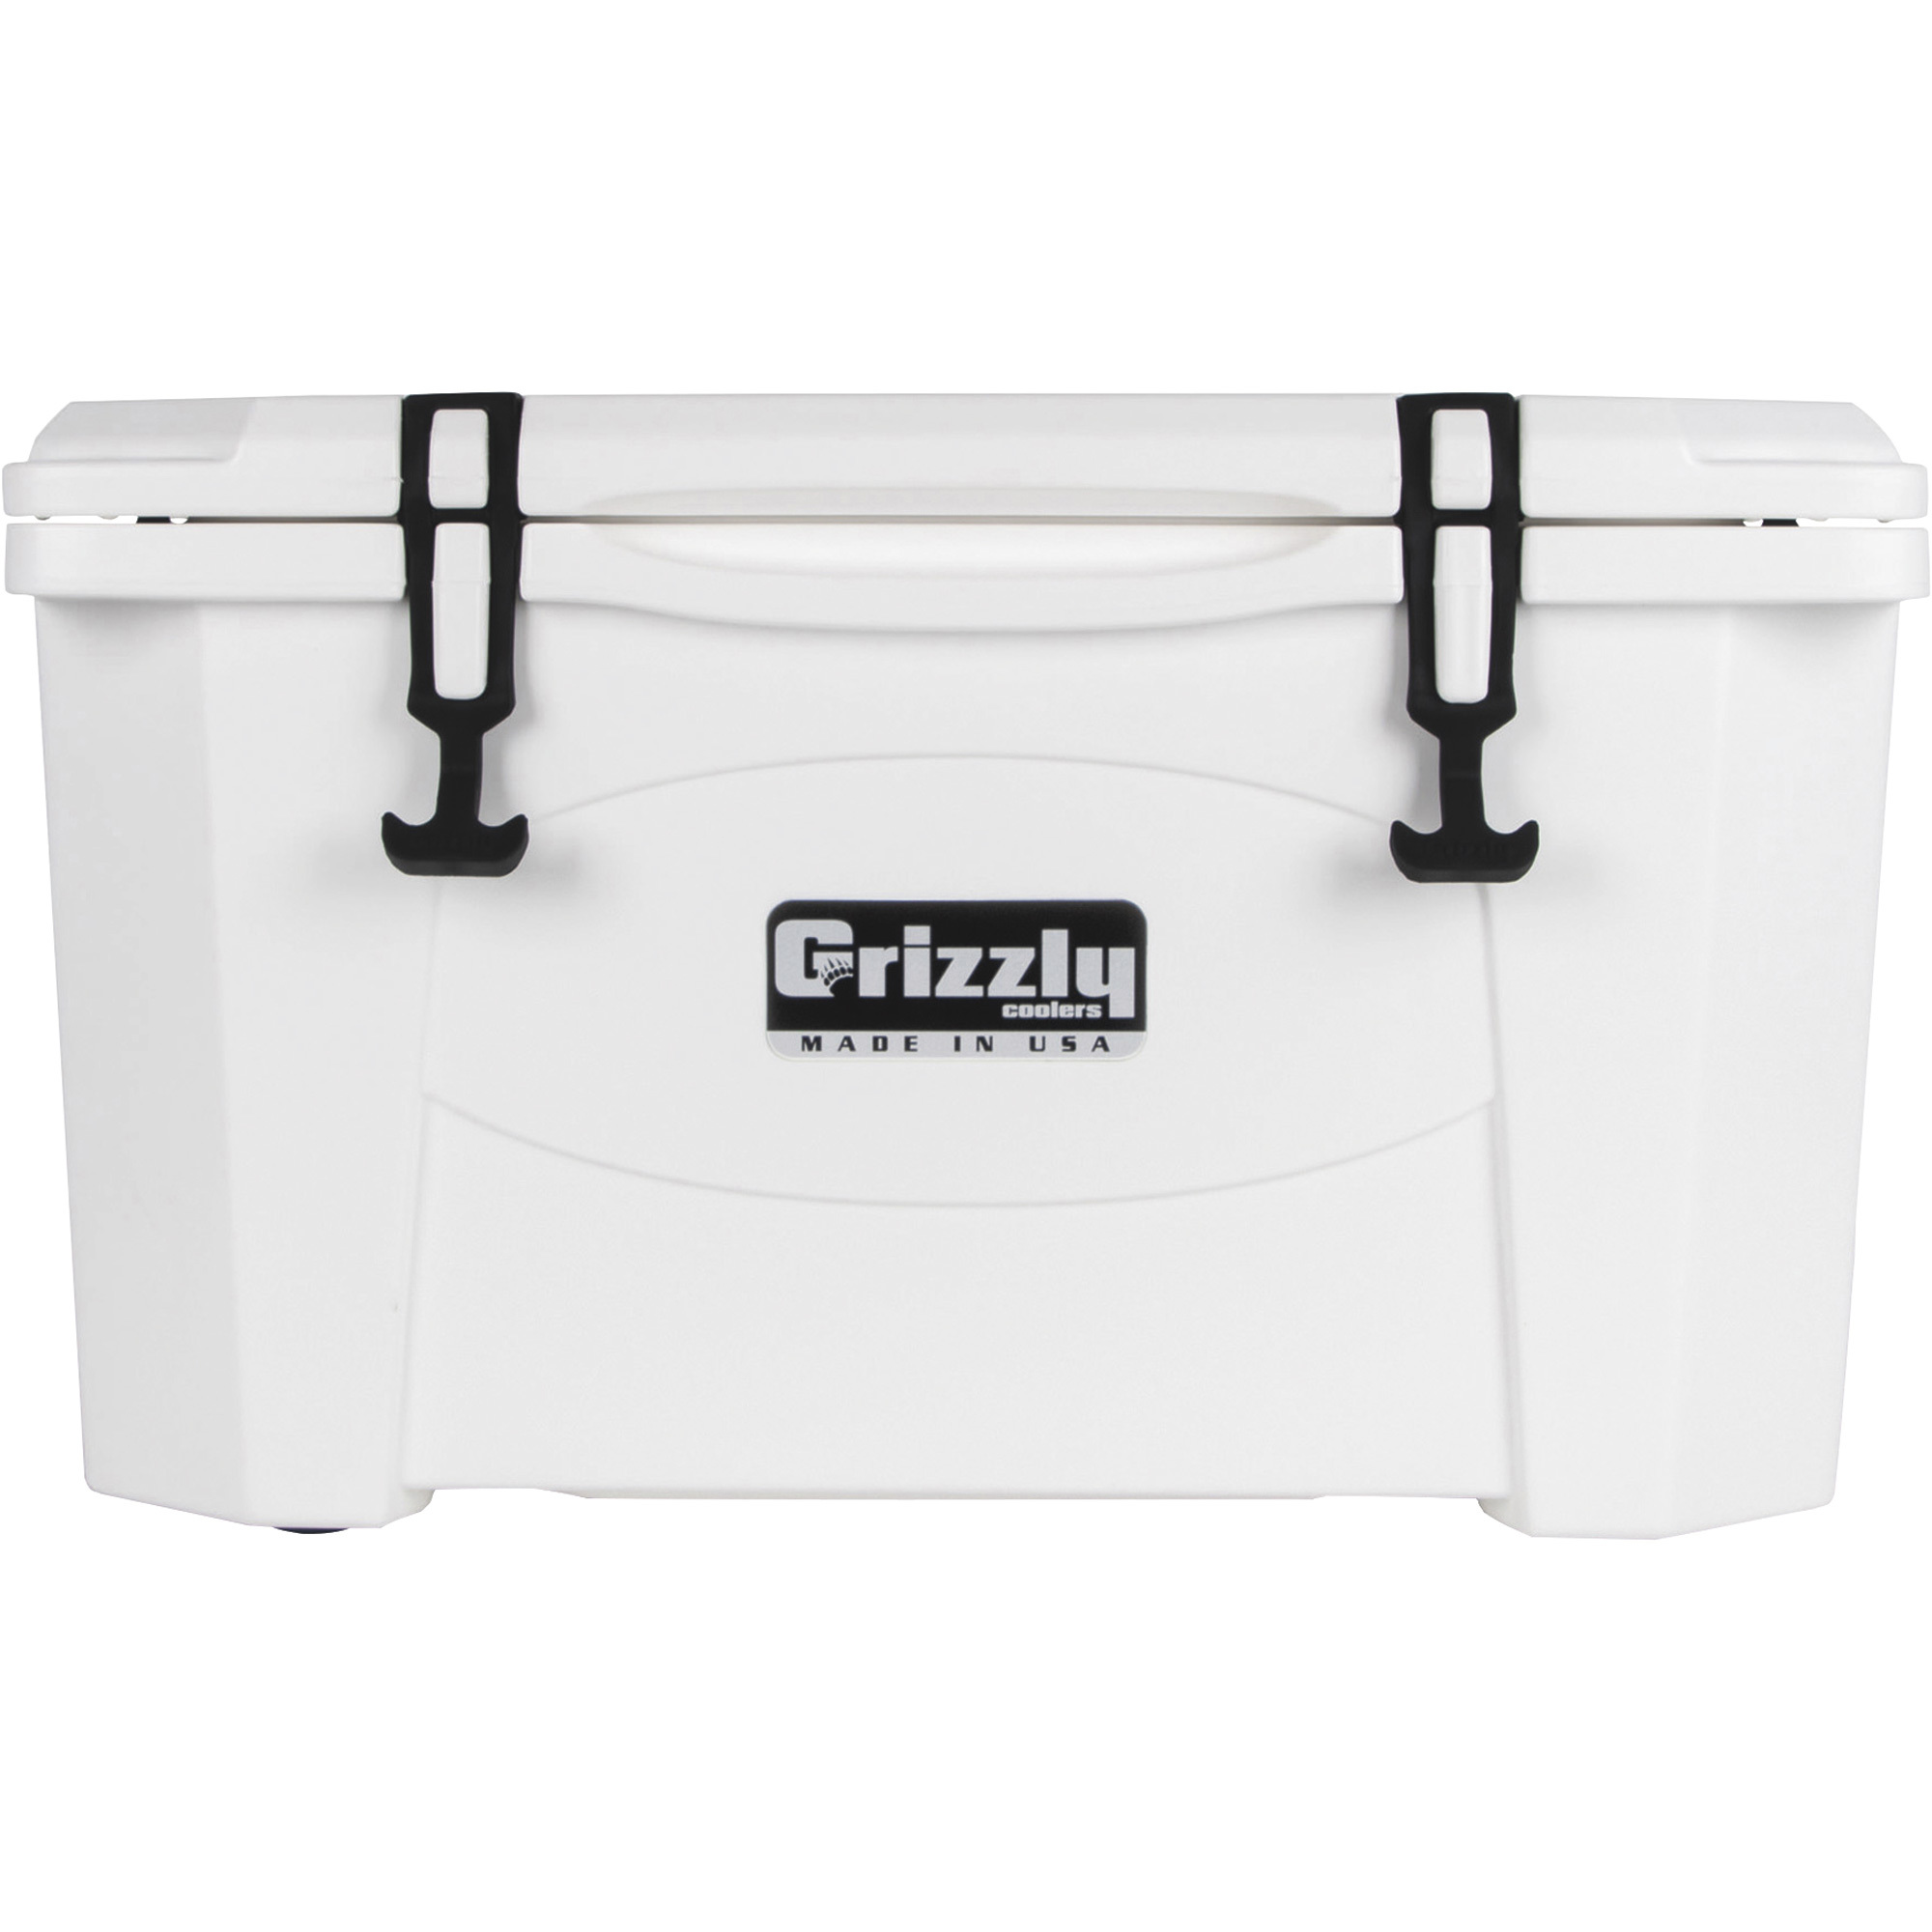 White Grizzly 40-Qt. Cooler, Model 51507 -  Grizzly Coolers, 400012